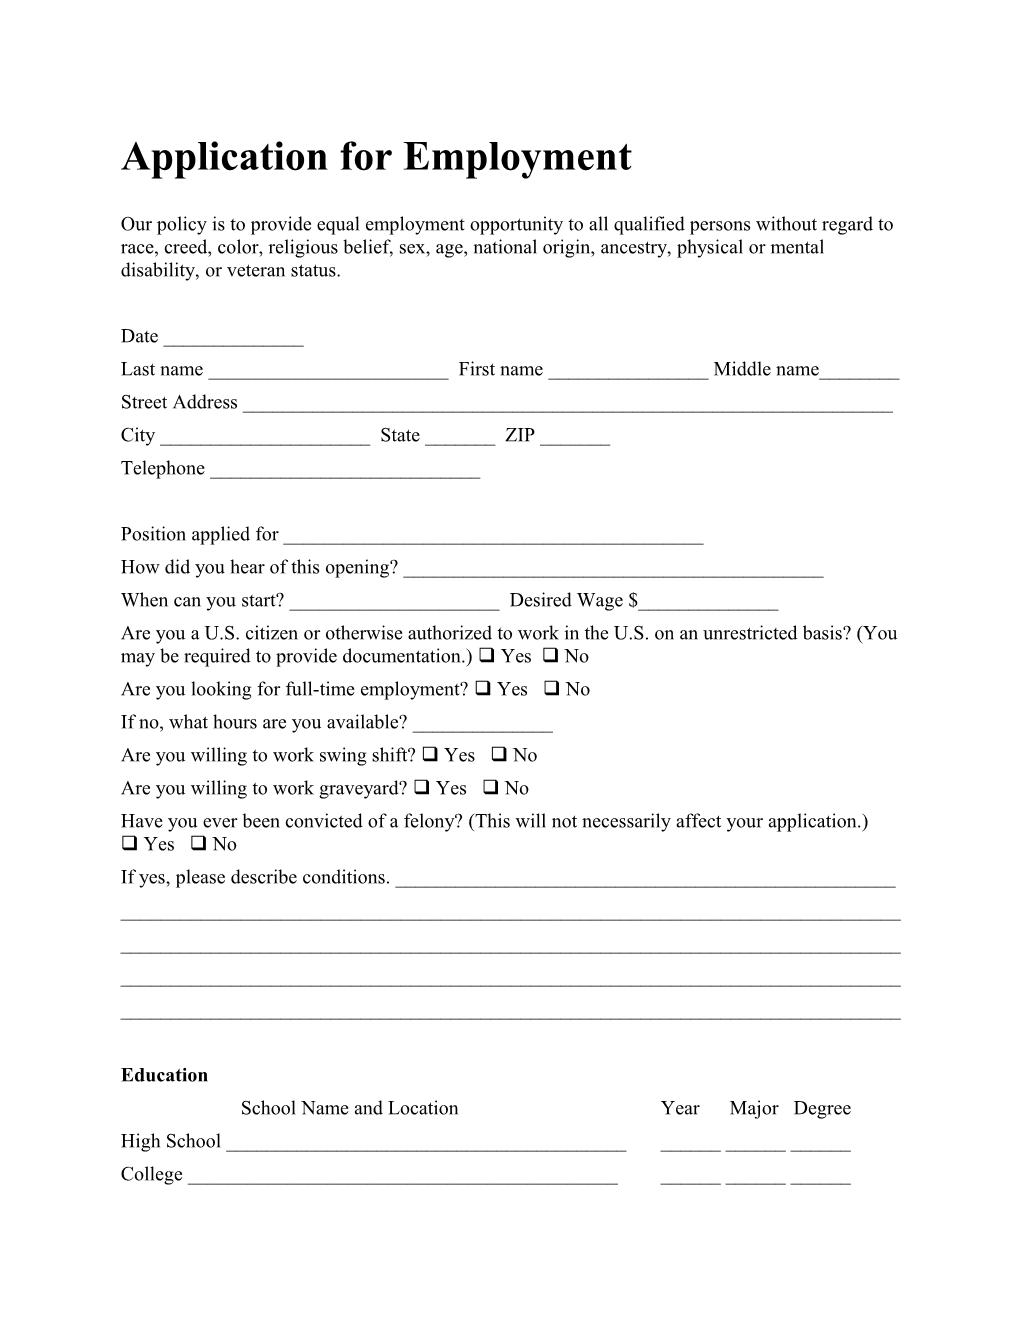 Application for Employment s170